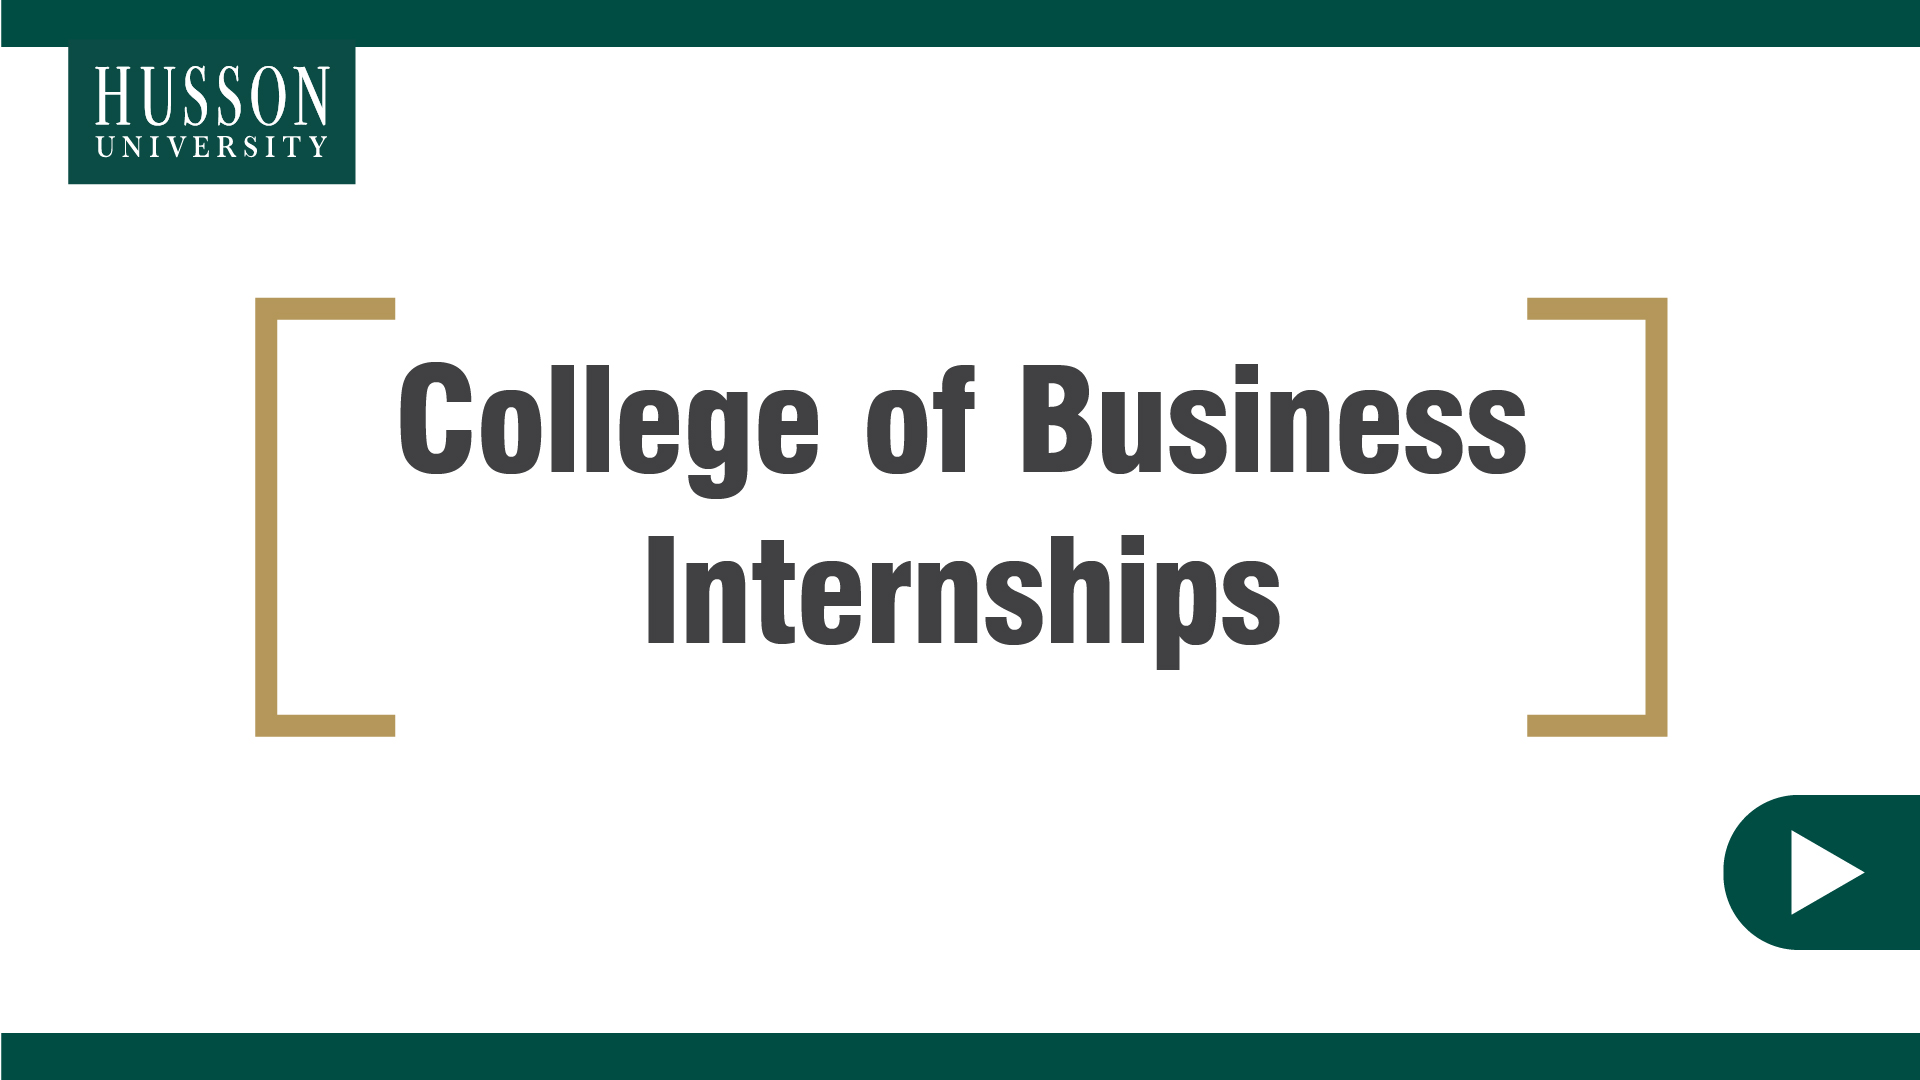 Internships in the College of Business